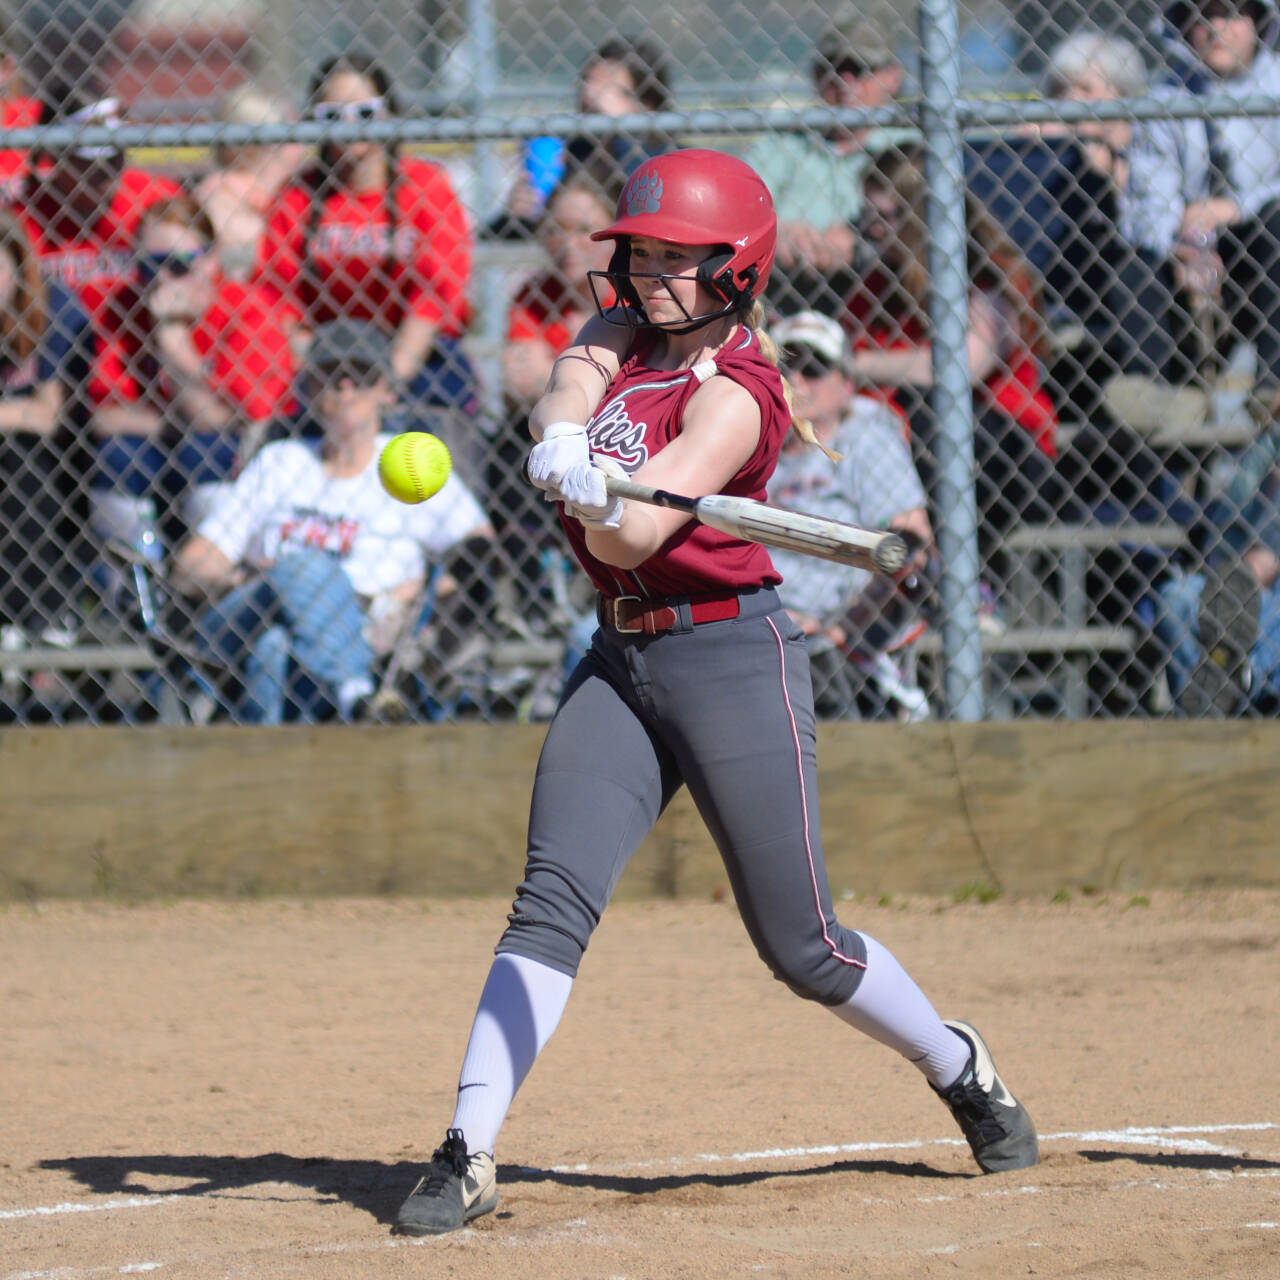 DAILY WORLD FILE PHOTO Hoquiam second baseman Ella Folkers hit a go-ahead grand slam home run in the Grizzlies’ 7-4 win over Deer Park in the 1A State Tournament quarterfinals on Friday in Richland.